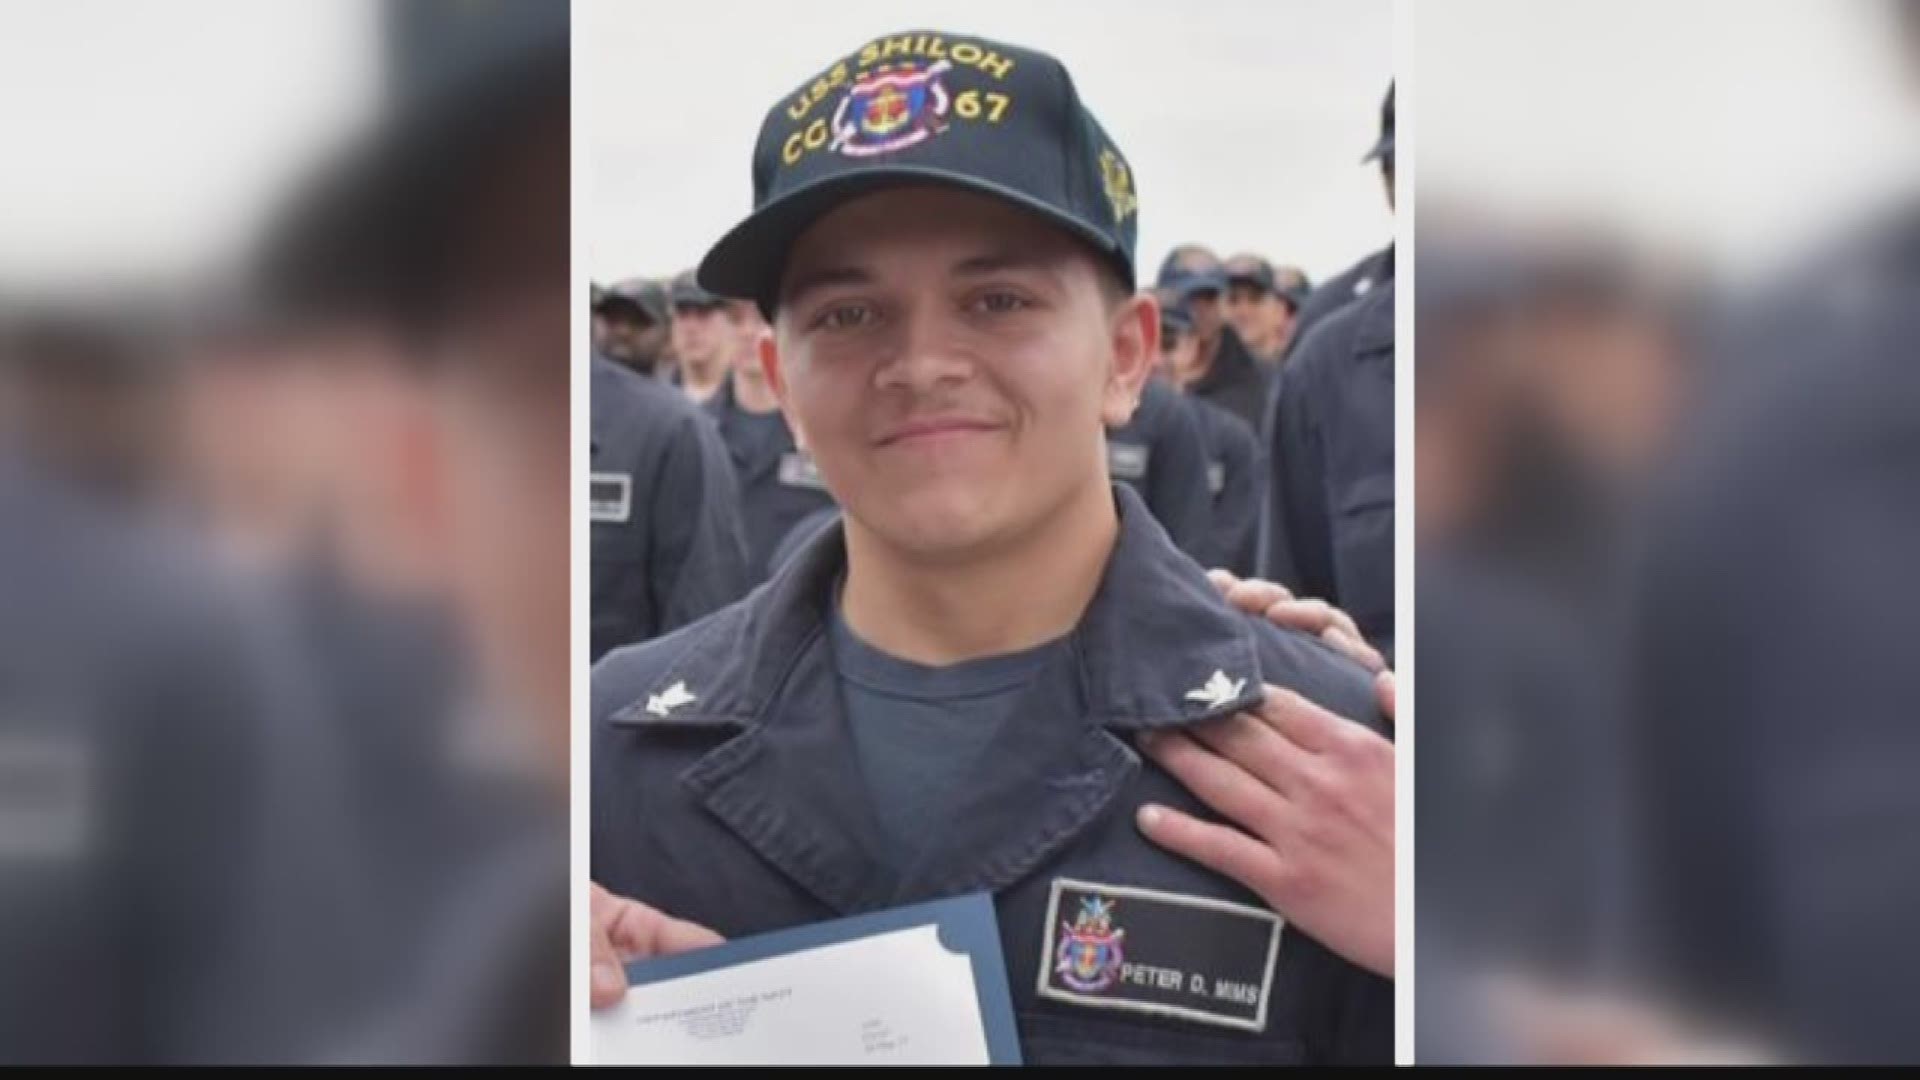 The U.S. Navy has identified an American sailor who went missing from a warship last week in Japan's southern waters.